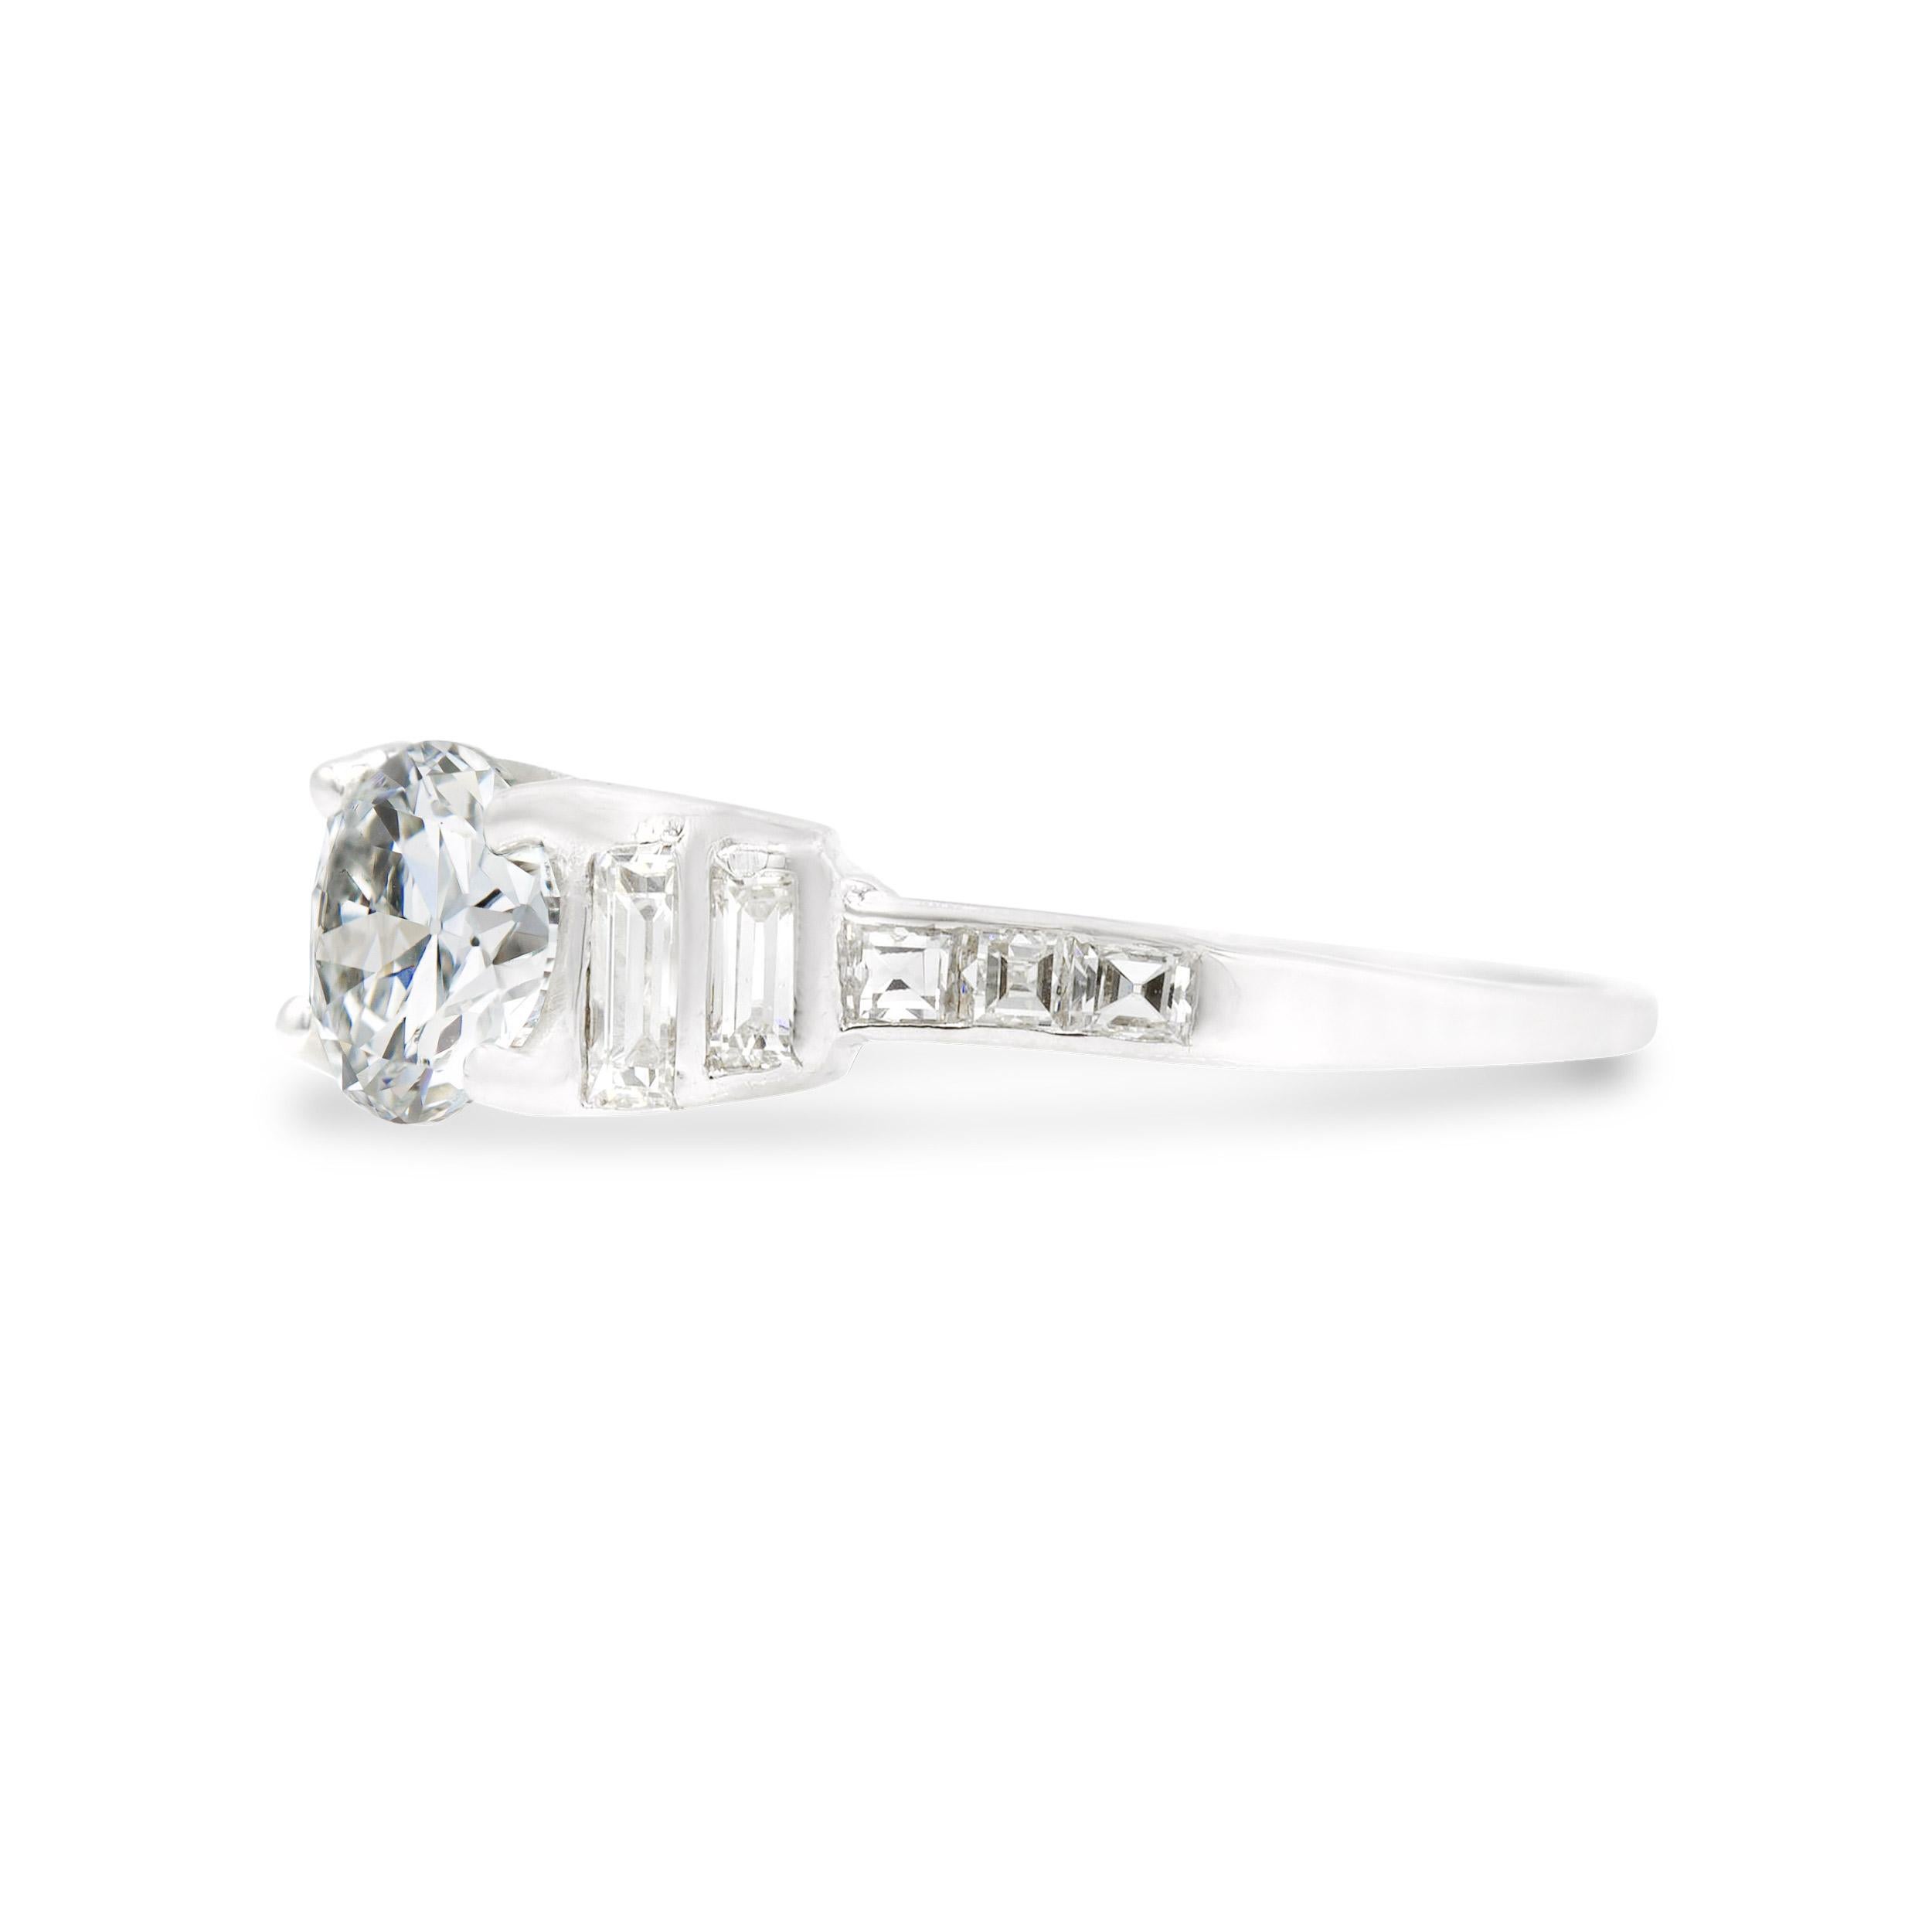 Get deco’d out with this chic and classic Art Deco engagement ring. Thanks to its open table and broad facets, the spread-y old European diamond sparkles lively from the center. It’s shouldered by four striking, crystal clear, straight baguettes